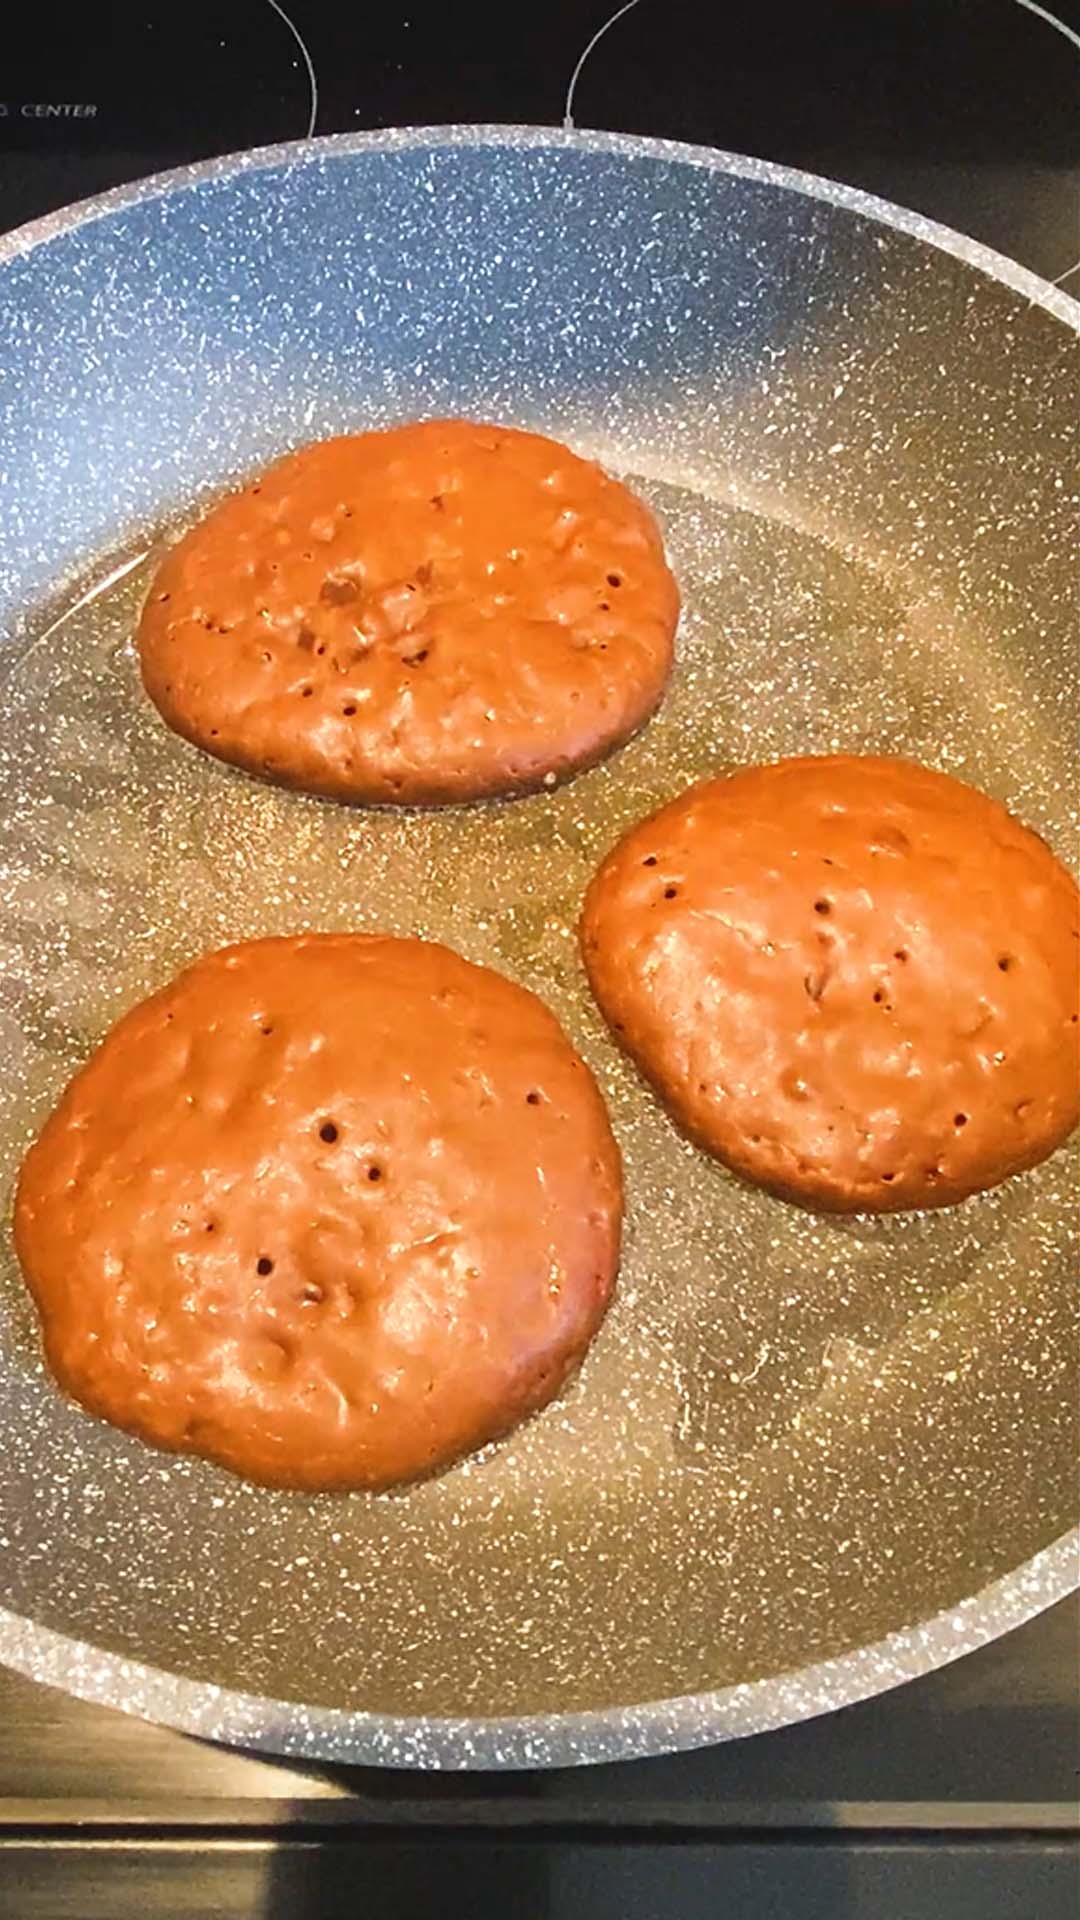 Three pancakes being cooked in a skillet.